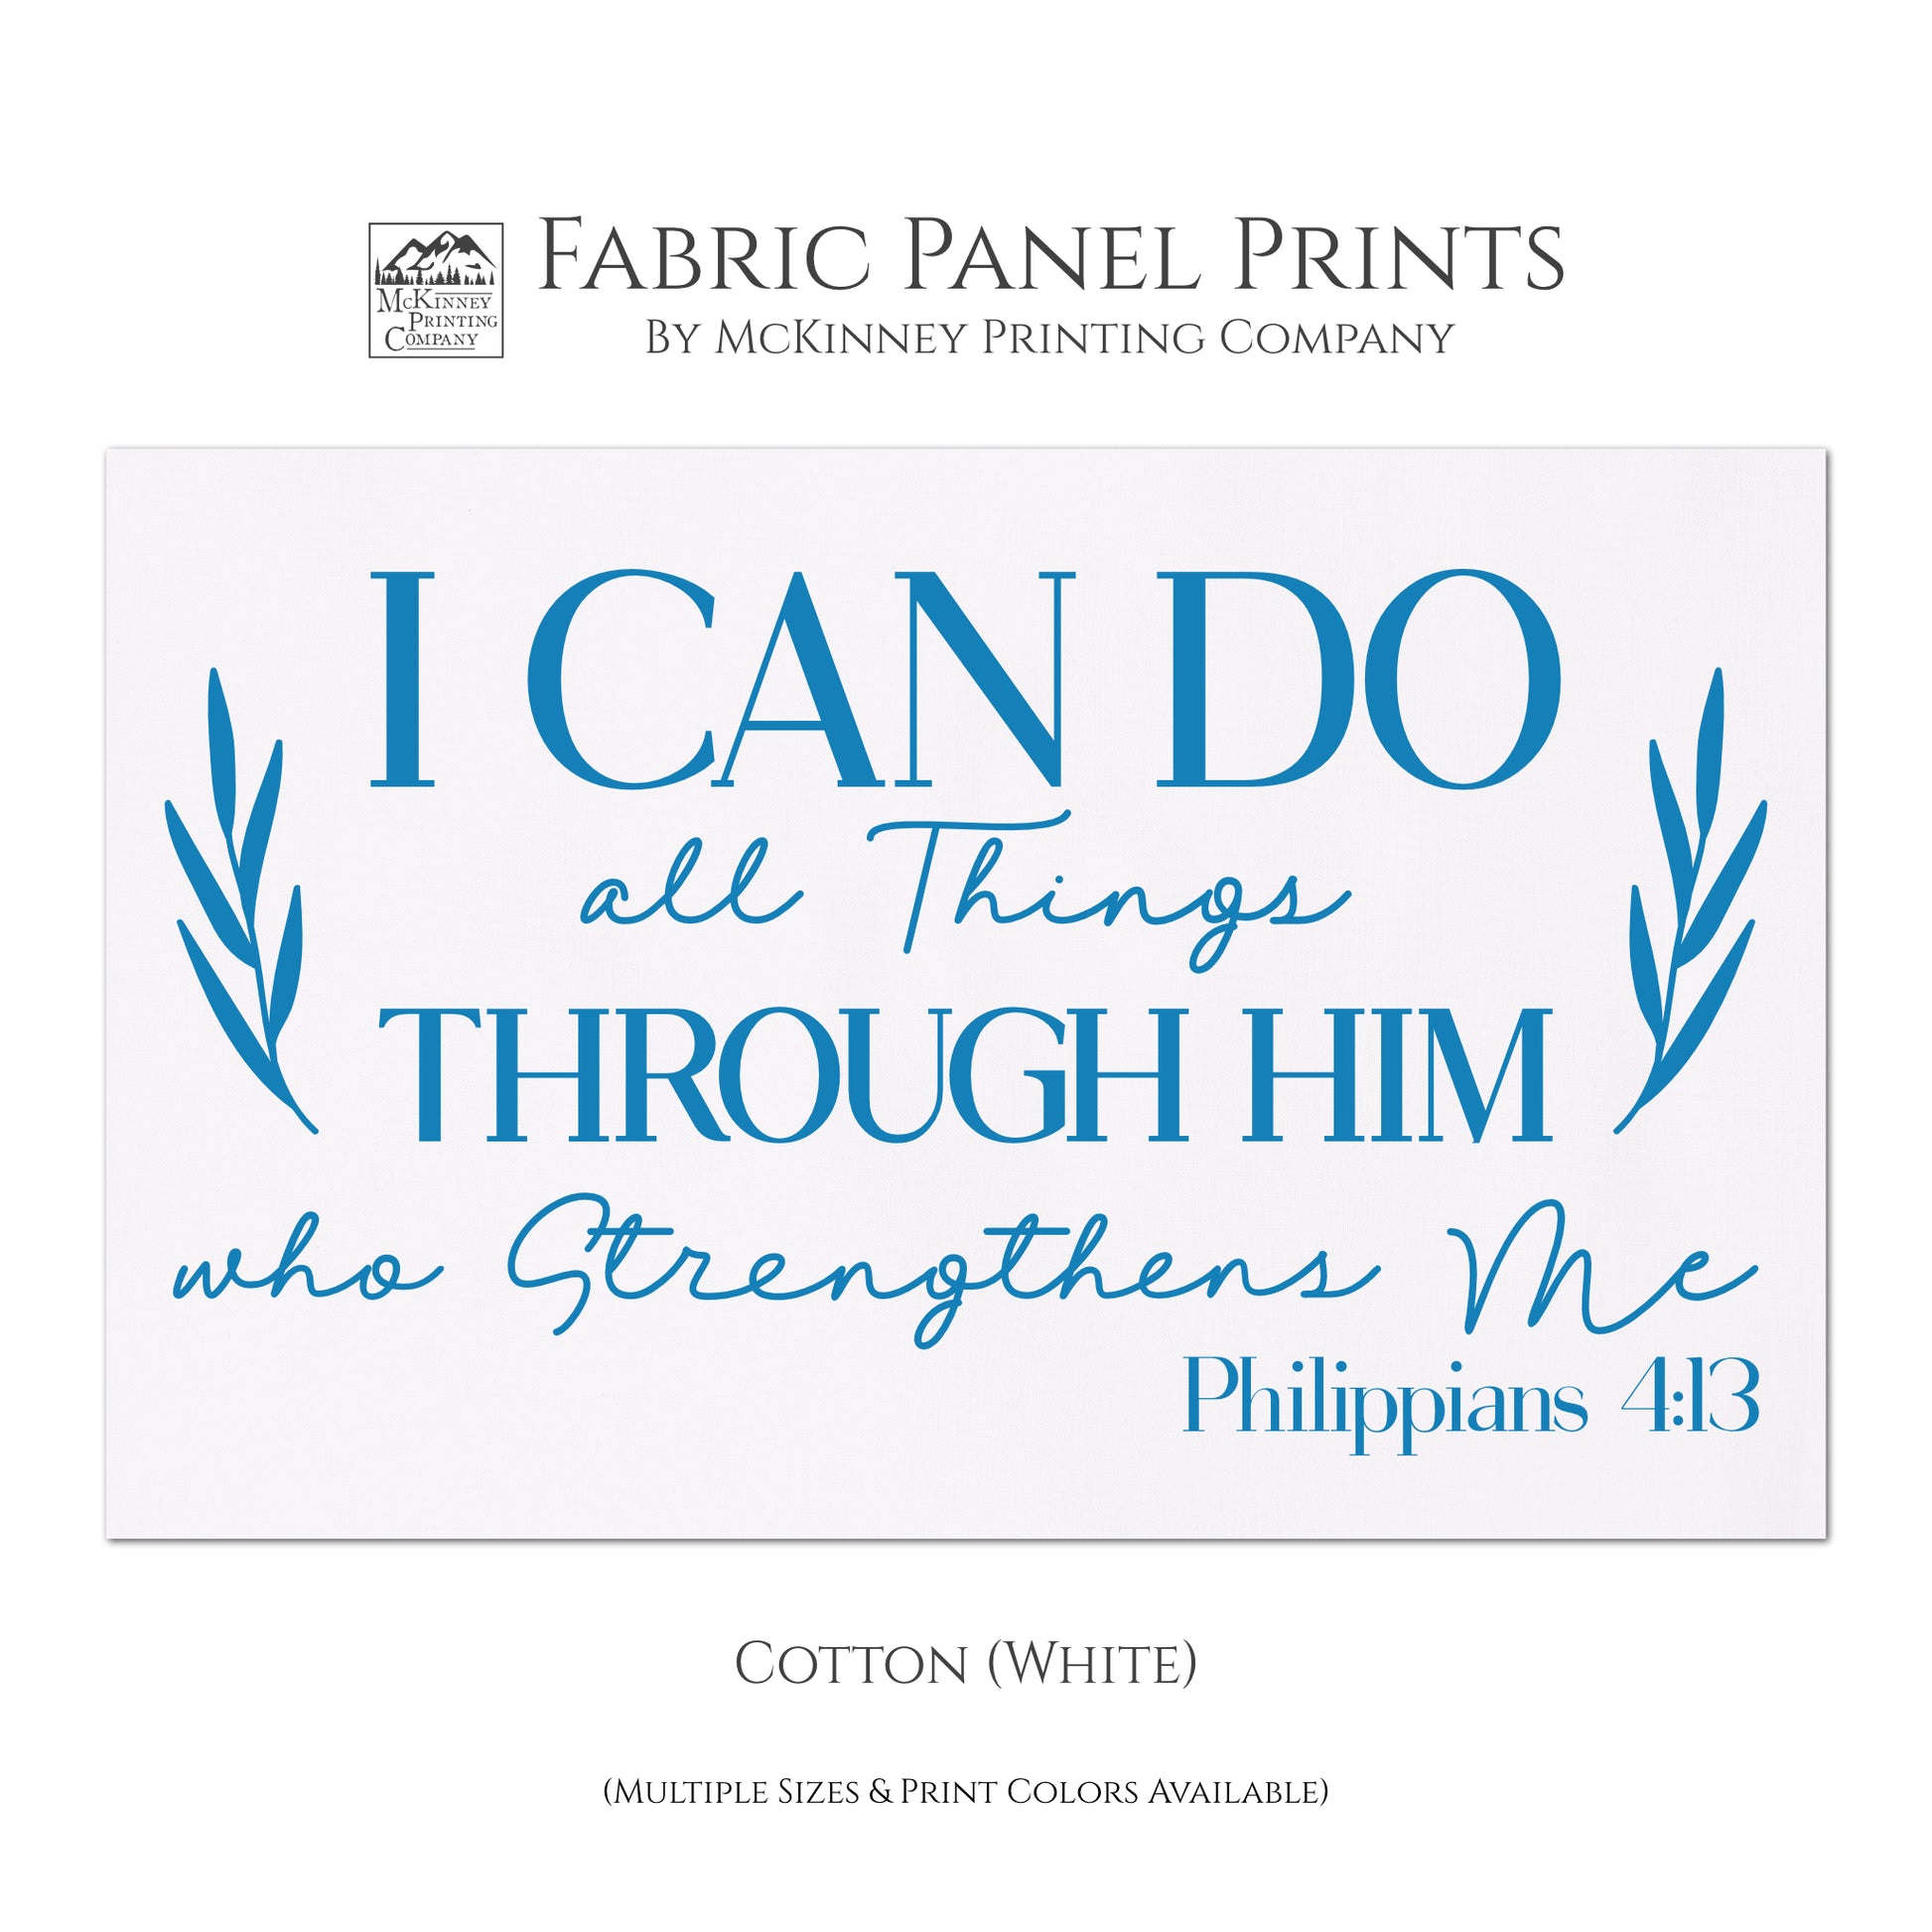 I can do all things through Him who strengthens me. Philippians 4 13 - Fabric Panel Print, Scripture Fabric, Religious Fabric, Quilt Block - Cotton, White